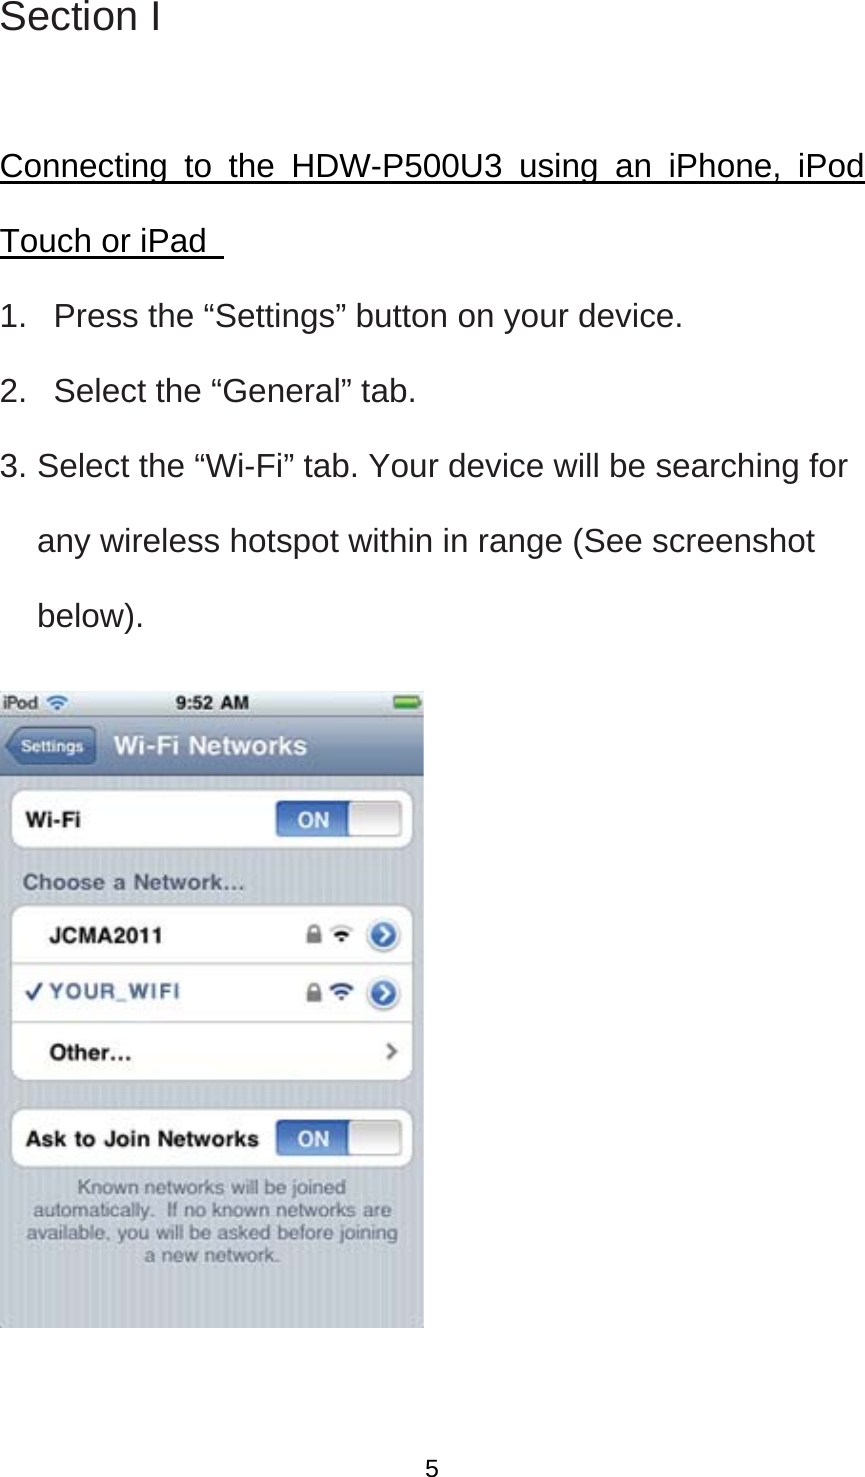 Section I  Connecting to the HDW-P500U3 using an iPhone, iPod Touch or iPad   1.   Press the “Settings” button on your device.   2.   Select the “General” tab.   3. Select the “Wi-Fi” tab. Your device will be searching for any wireless hotspot within in range (See screenshot below).          5